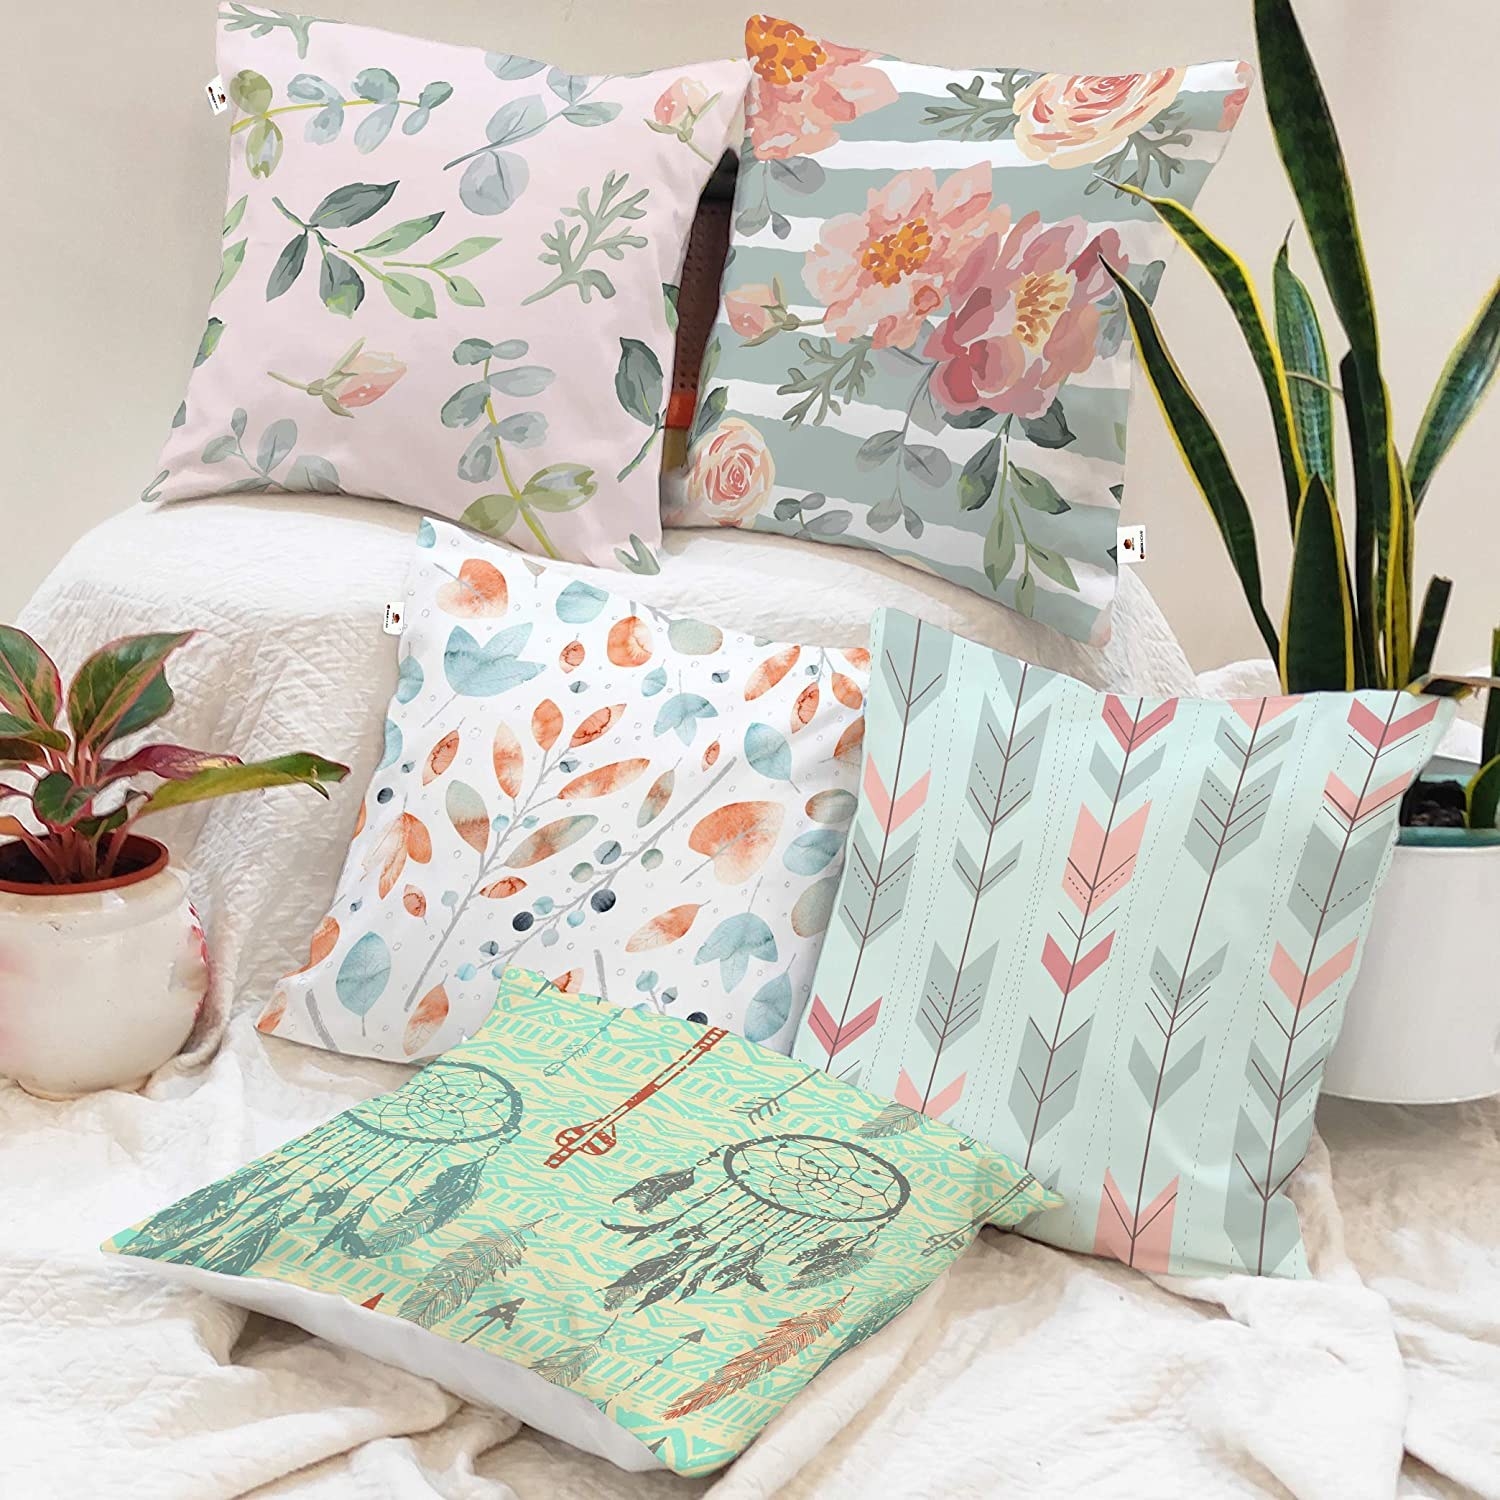 5 cushion covers with patterned with geometric prints, flowers, dreamcatchers, and leaves